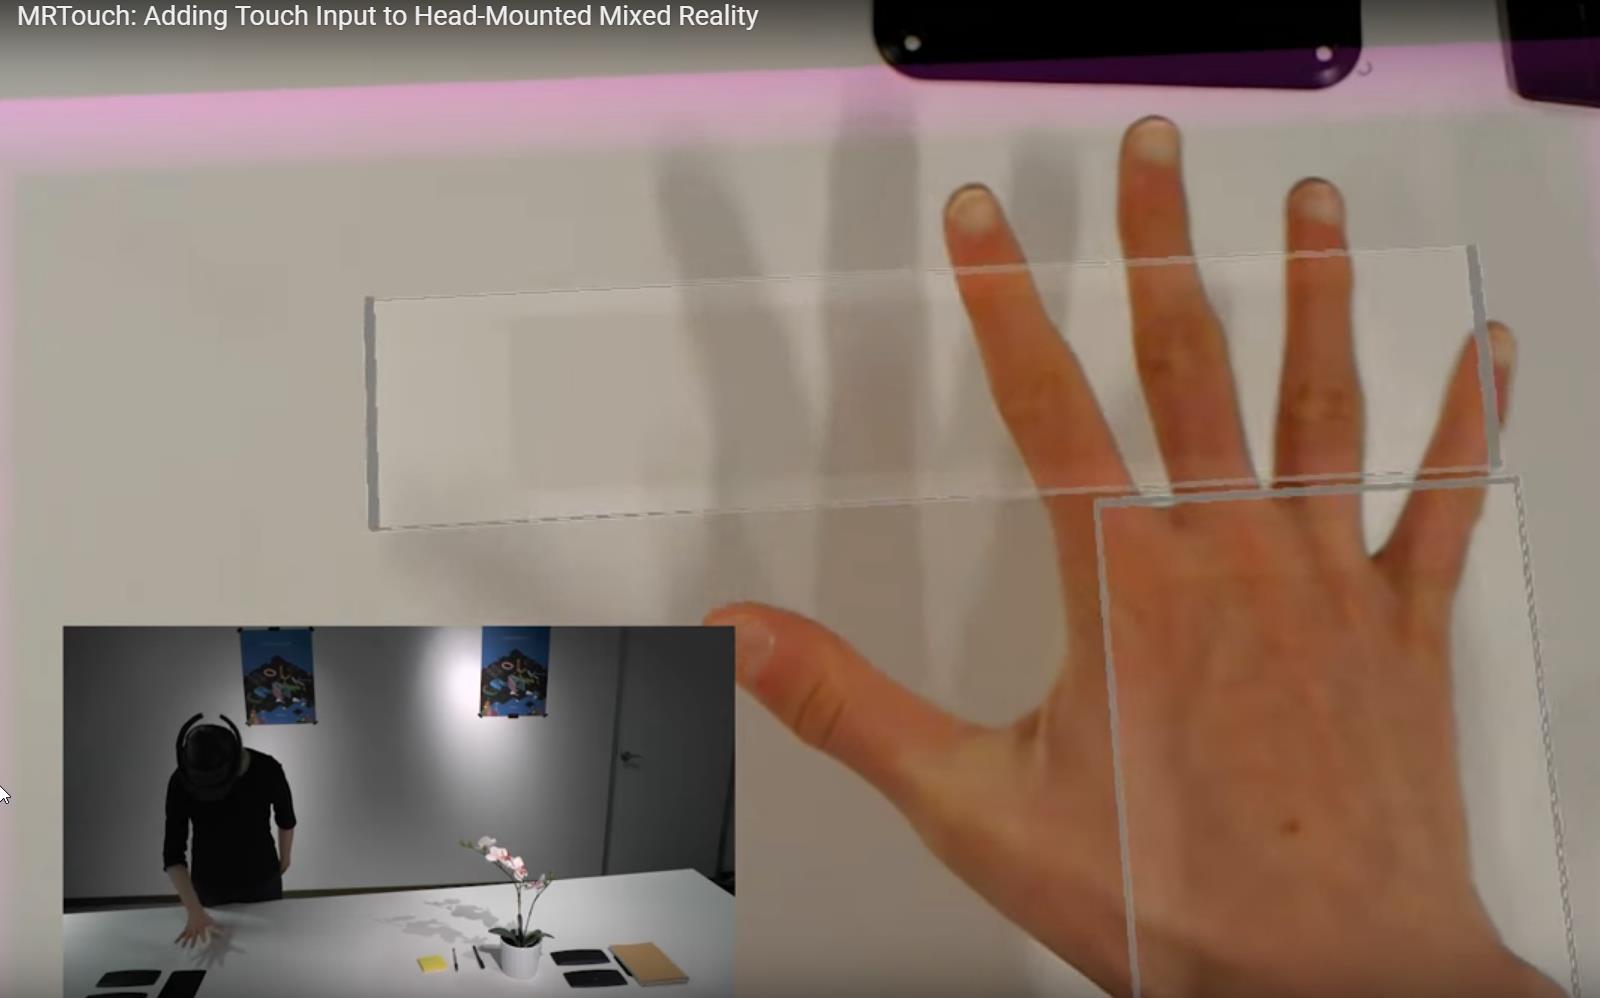 The Microsoft Research Team Created 'MRTouch' for the HoloLens.jpg